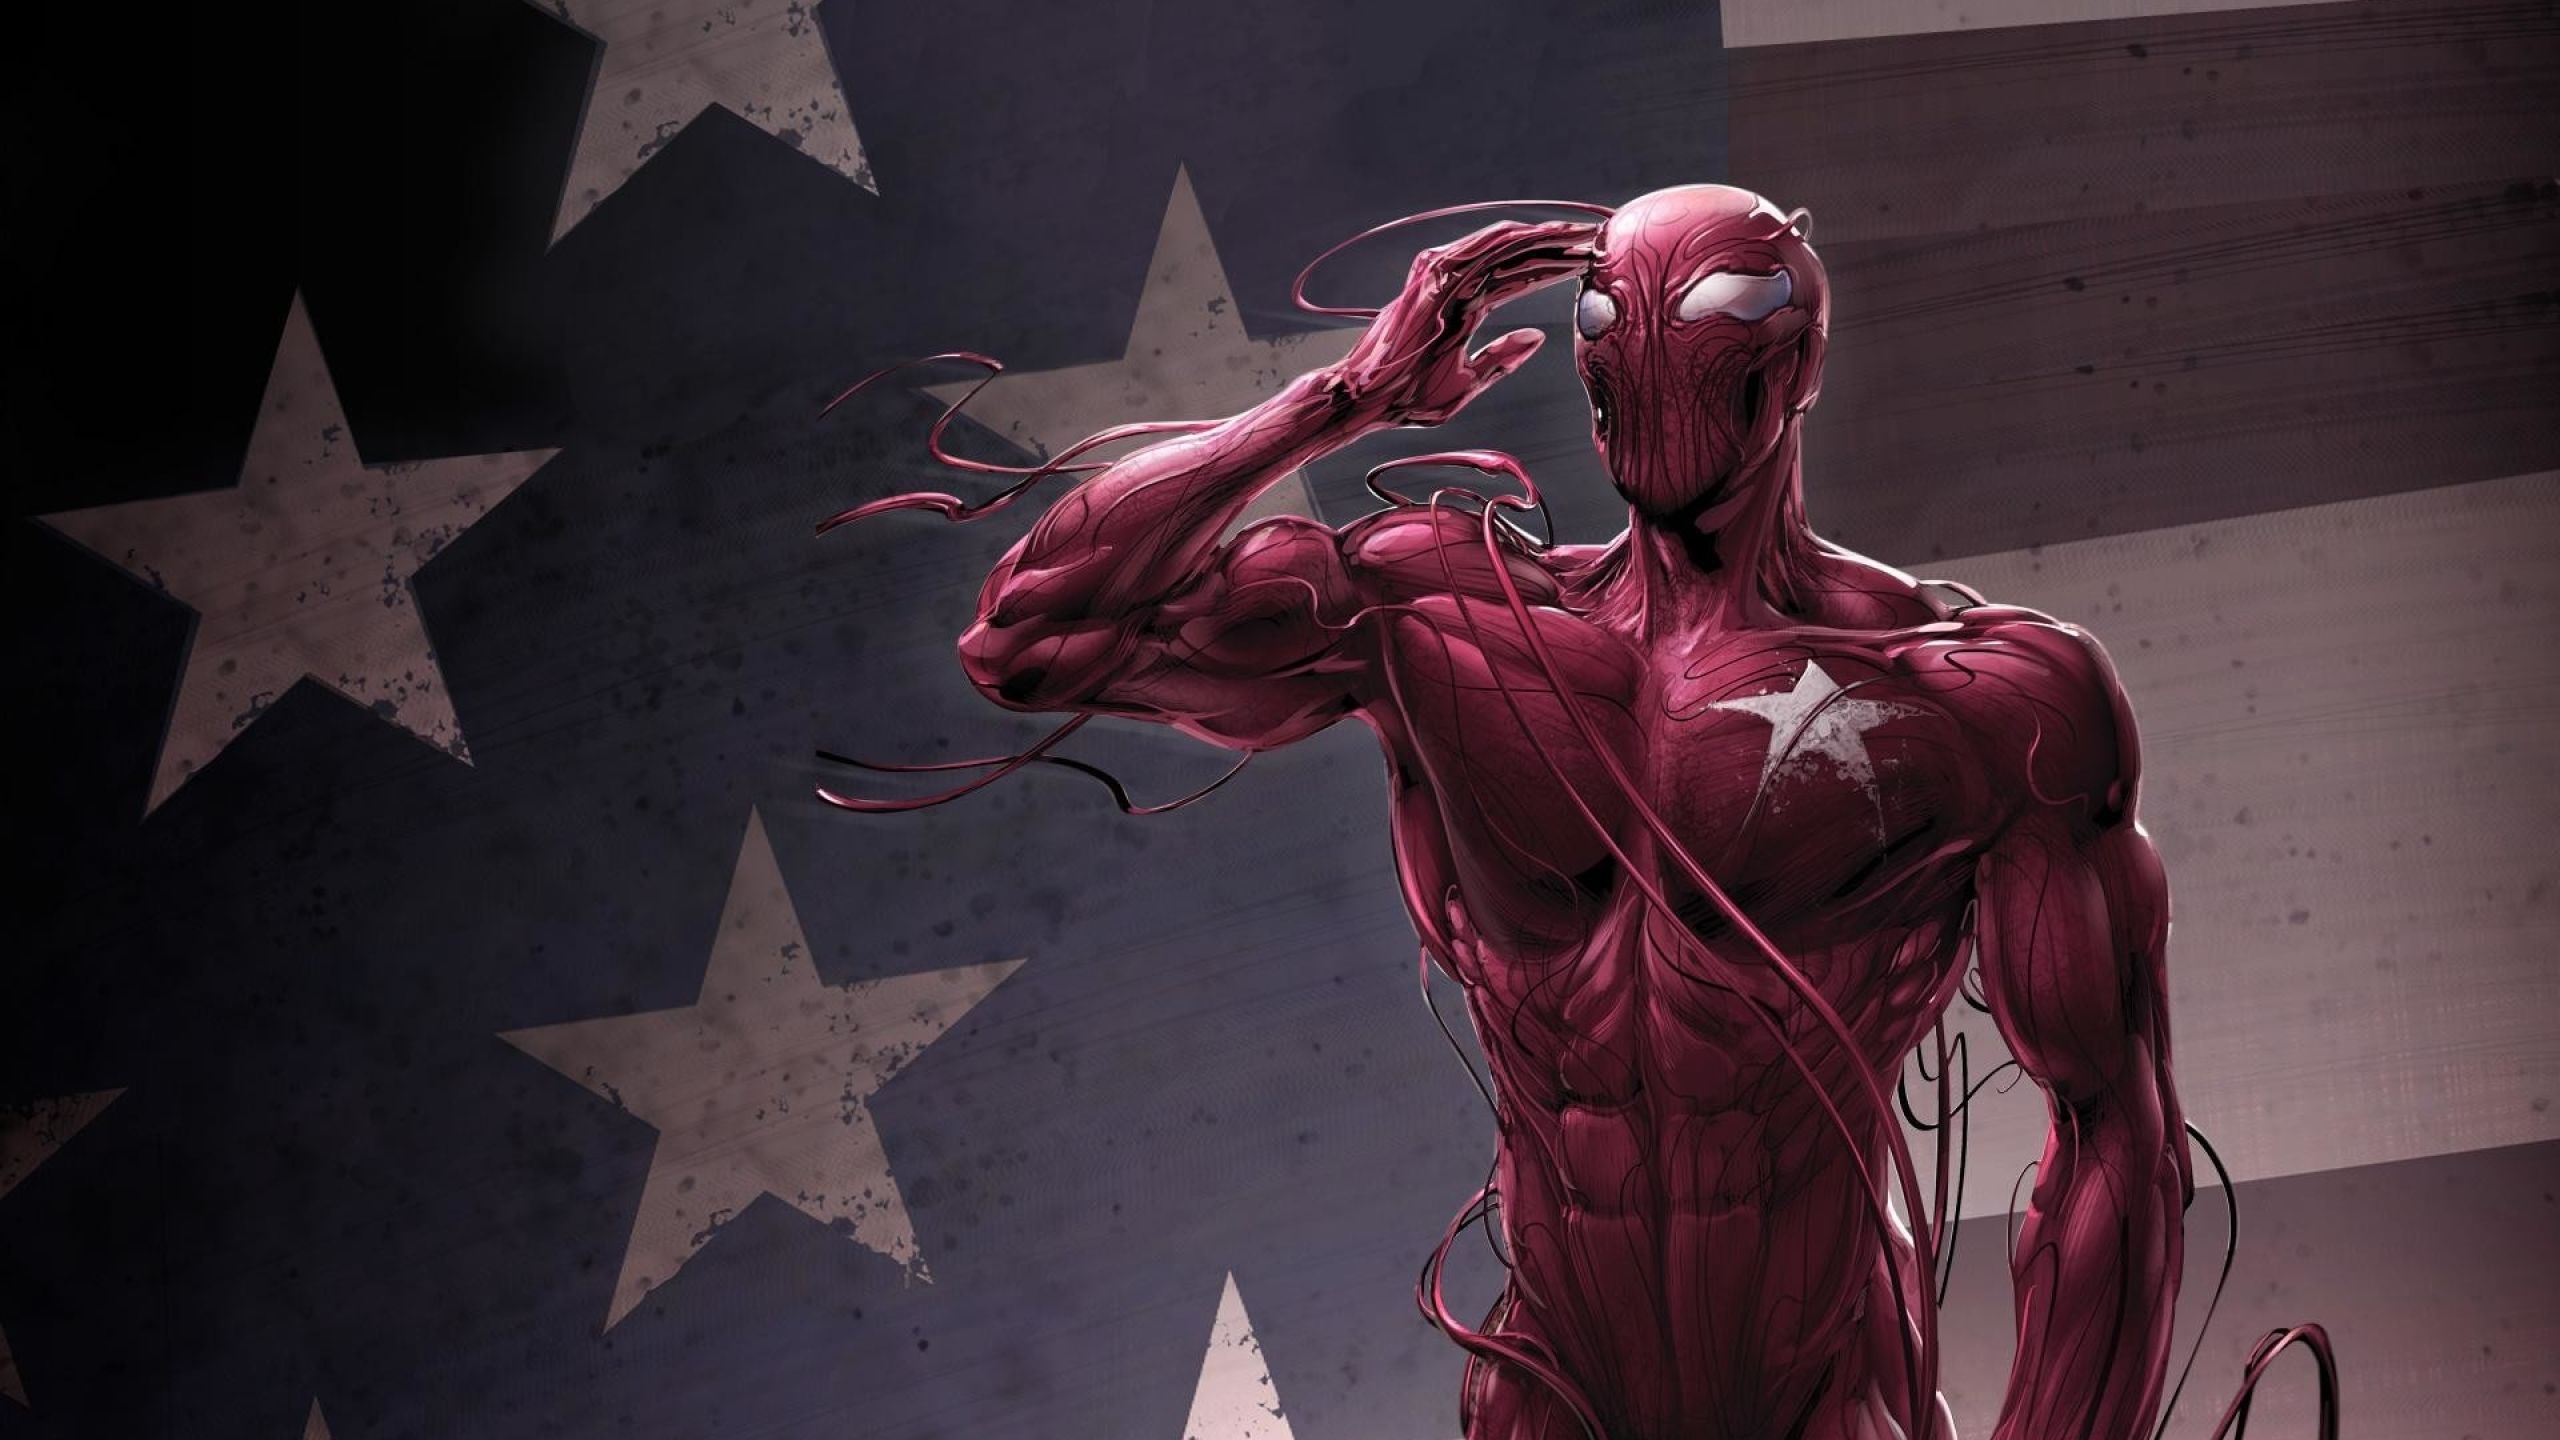 Marvel Comics Carnage 1440P Resolution Wallpaper, HD Superheroes 4K Wallpaper, Image, Photo and Background